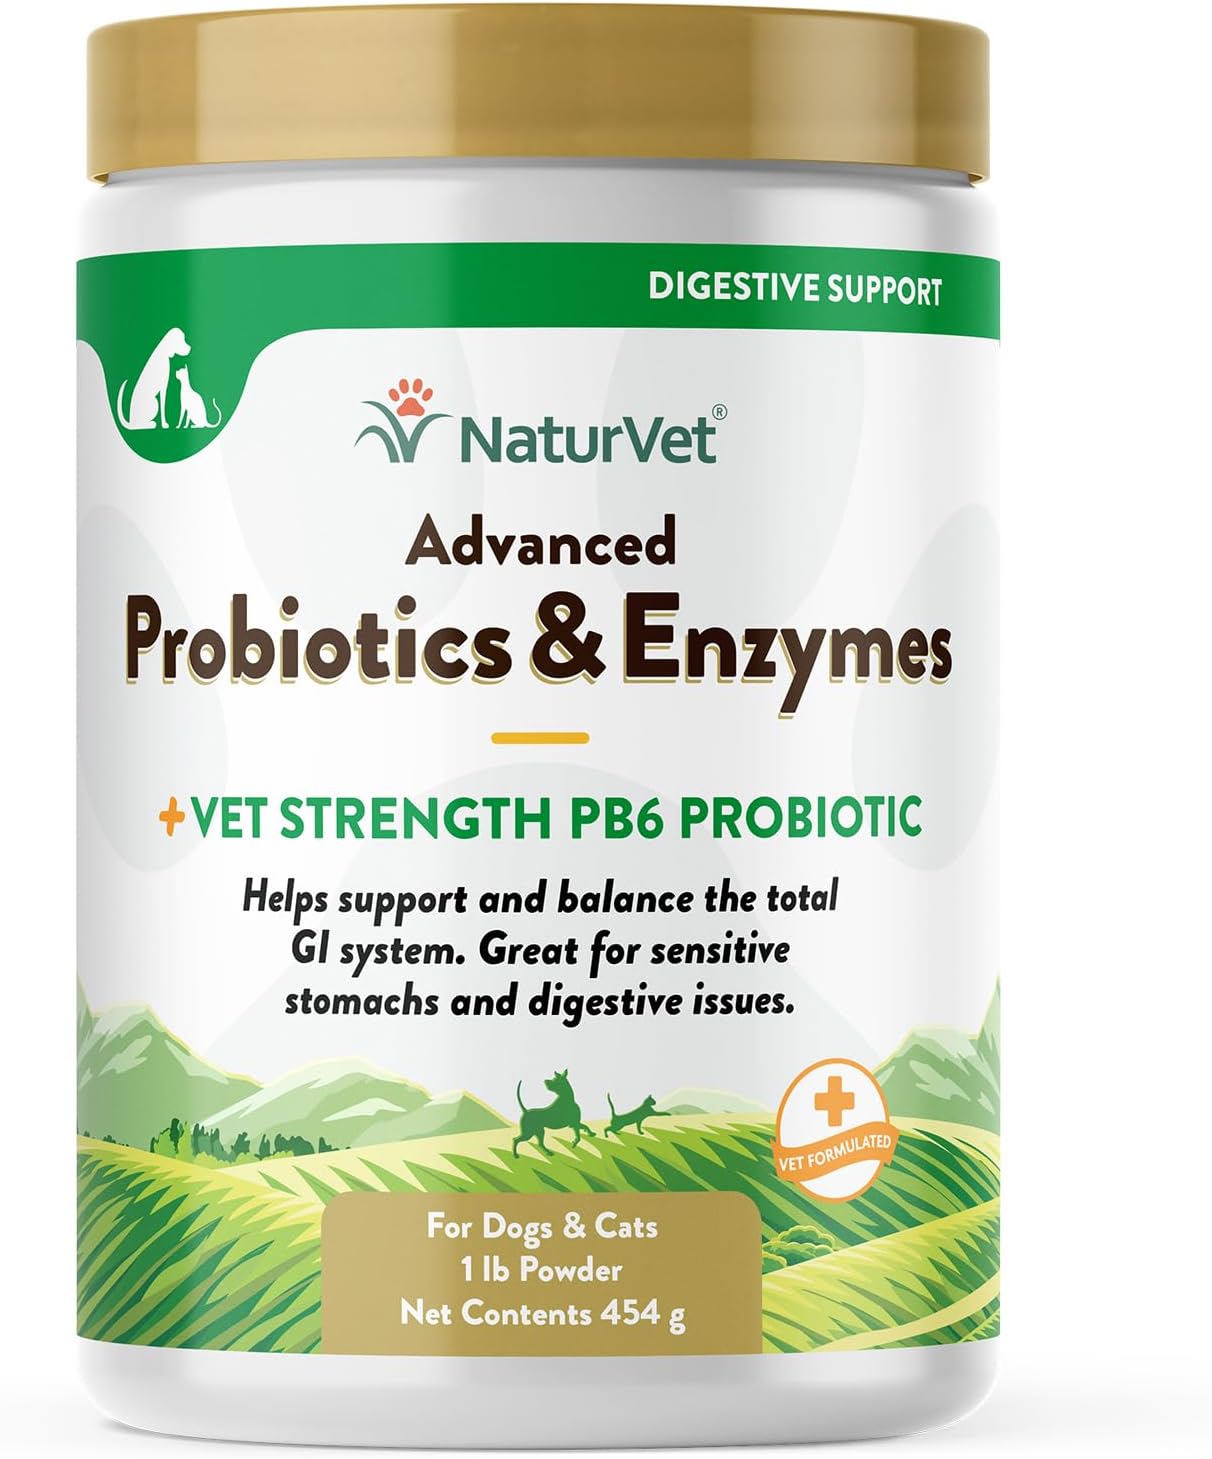 NaturVet – Advanced Probiotics & Enzymes - Plus Vet Strength PB6 Probiotic | Supports and Balances Pets with Sensitive Stomachs & Digestive Issues | for Dogs & Cats (1 lb)